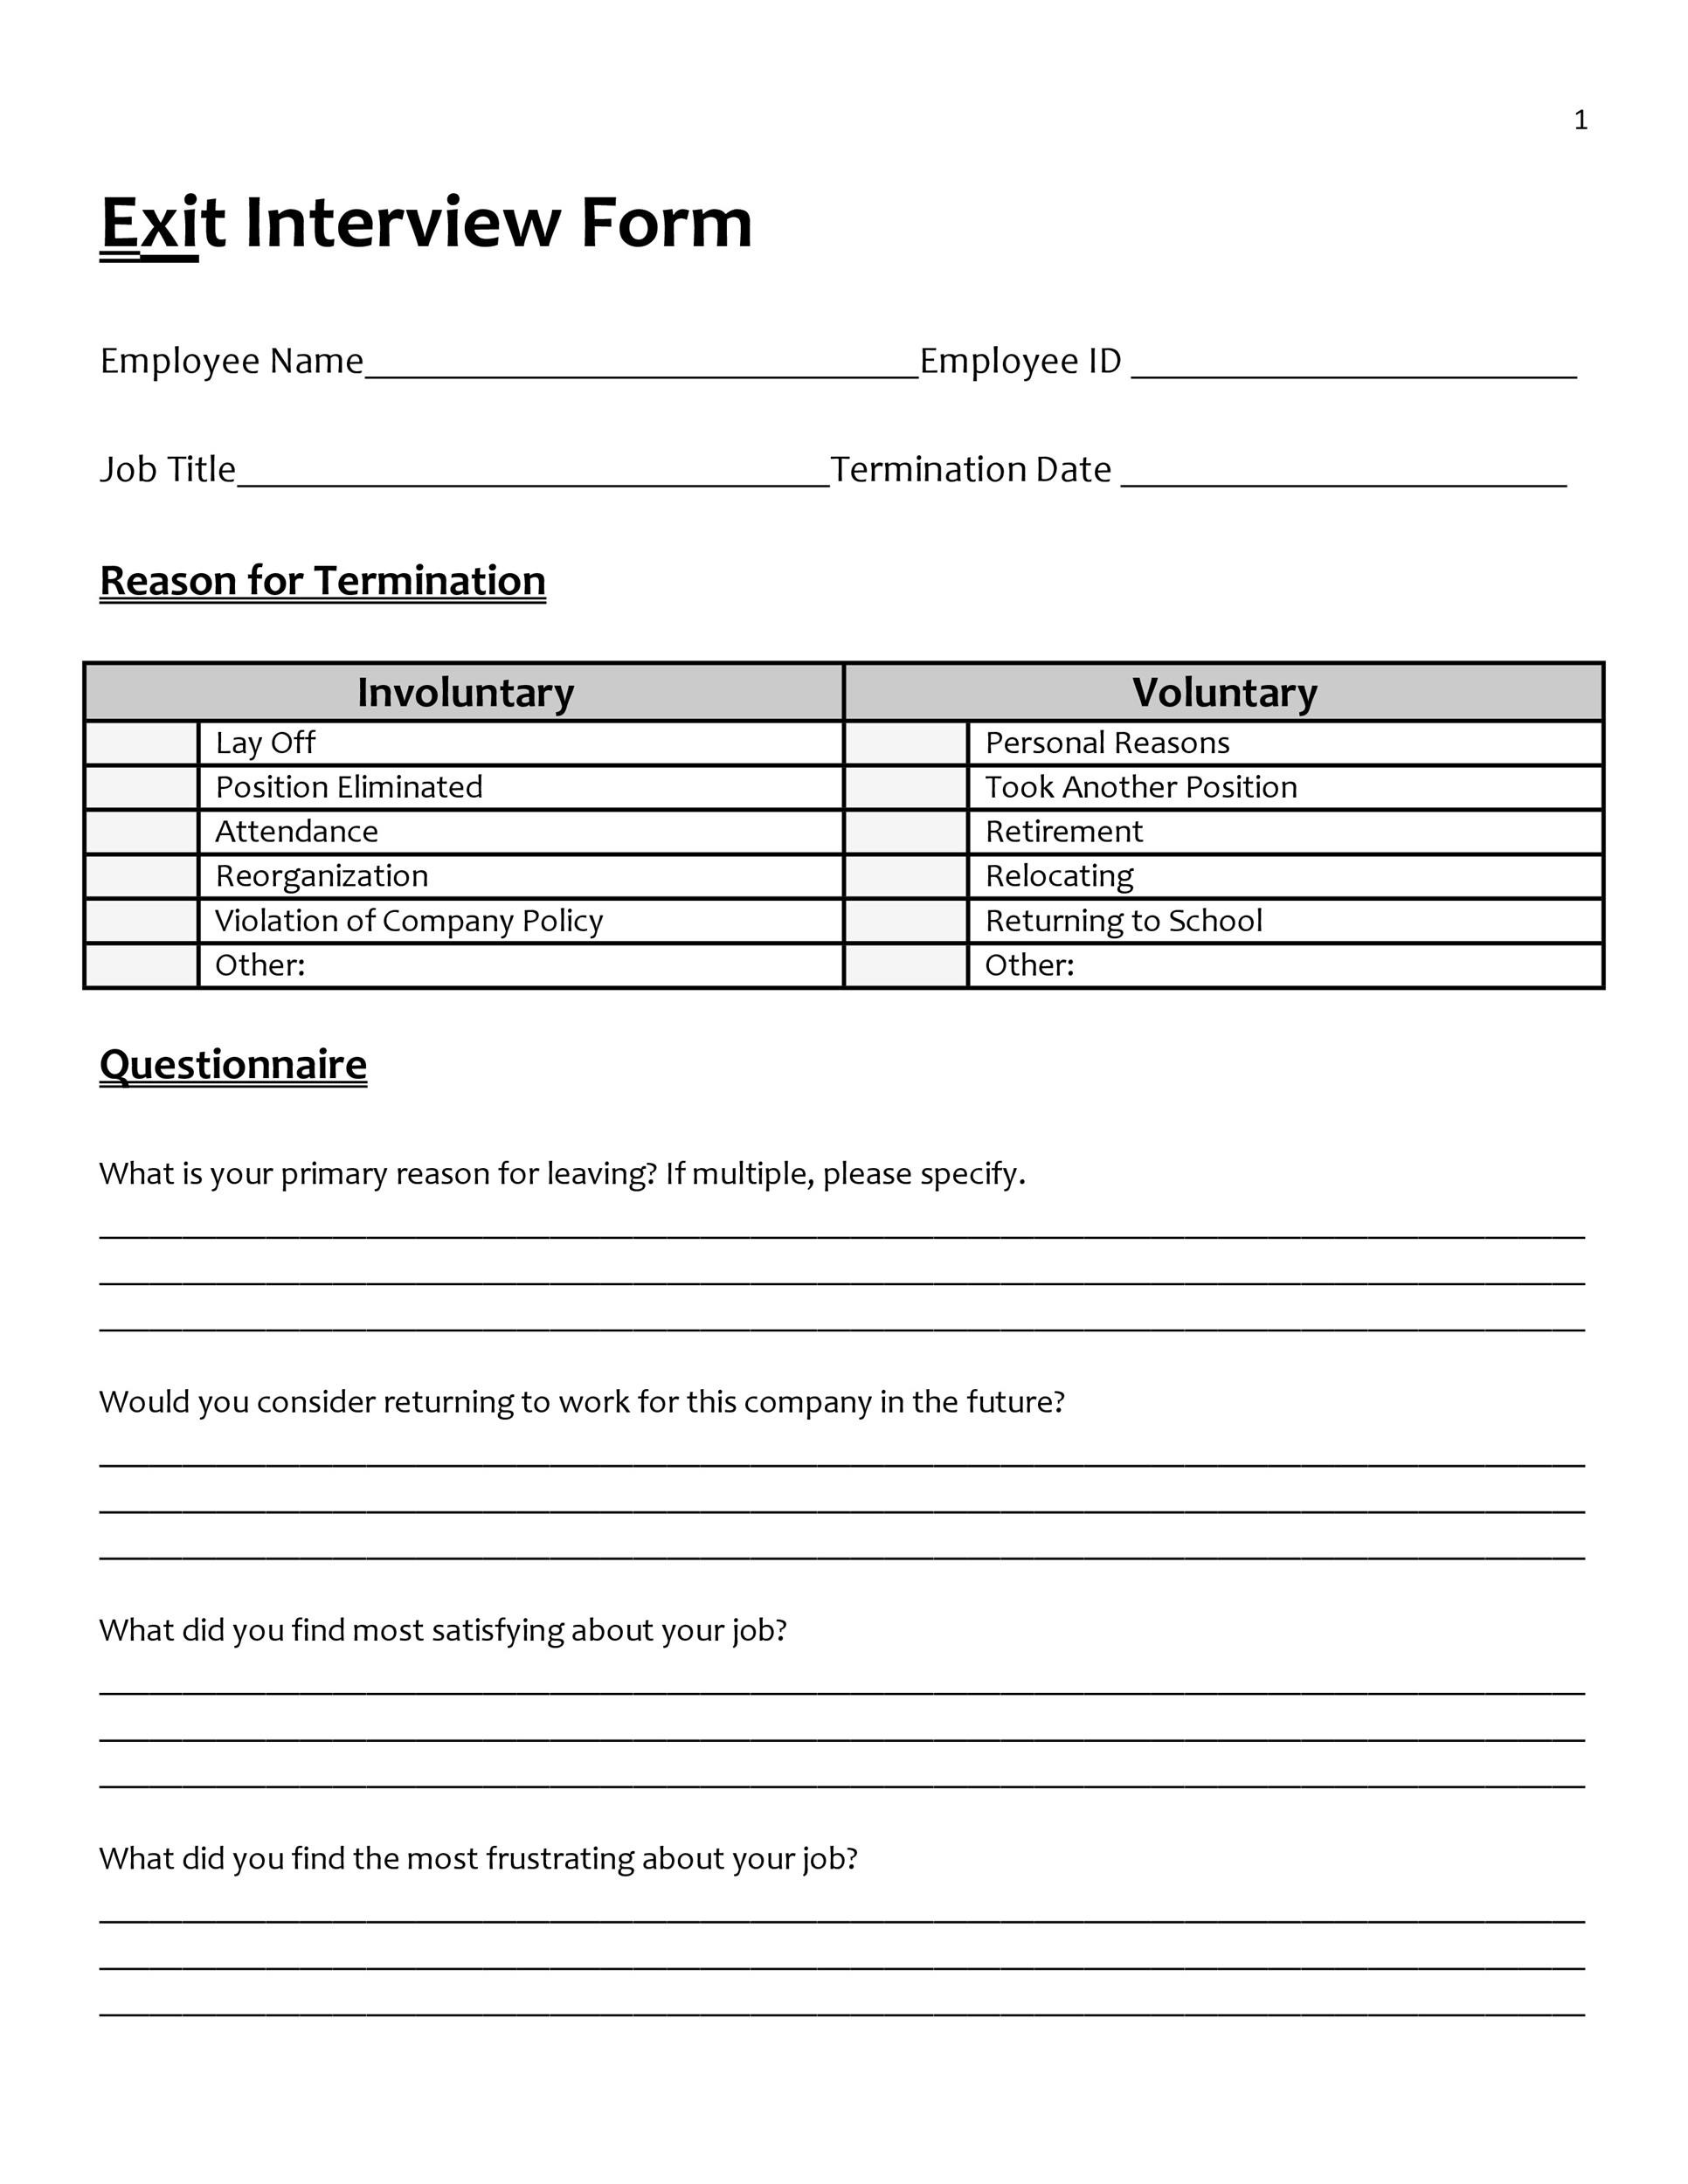 Interview Form Template Master of Documents